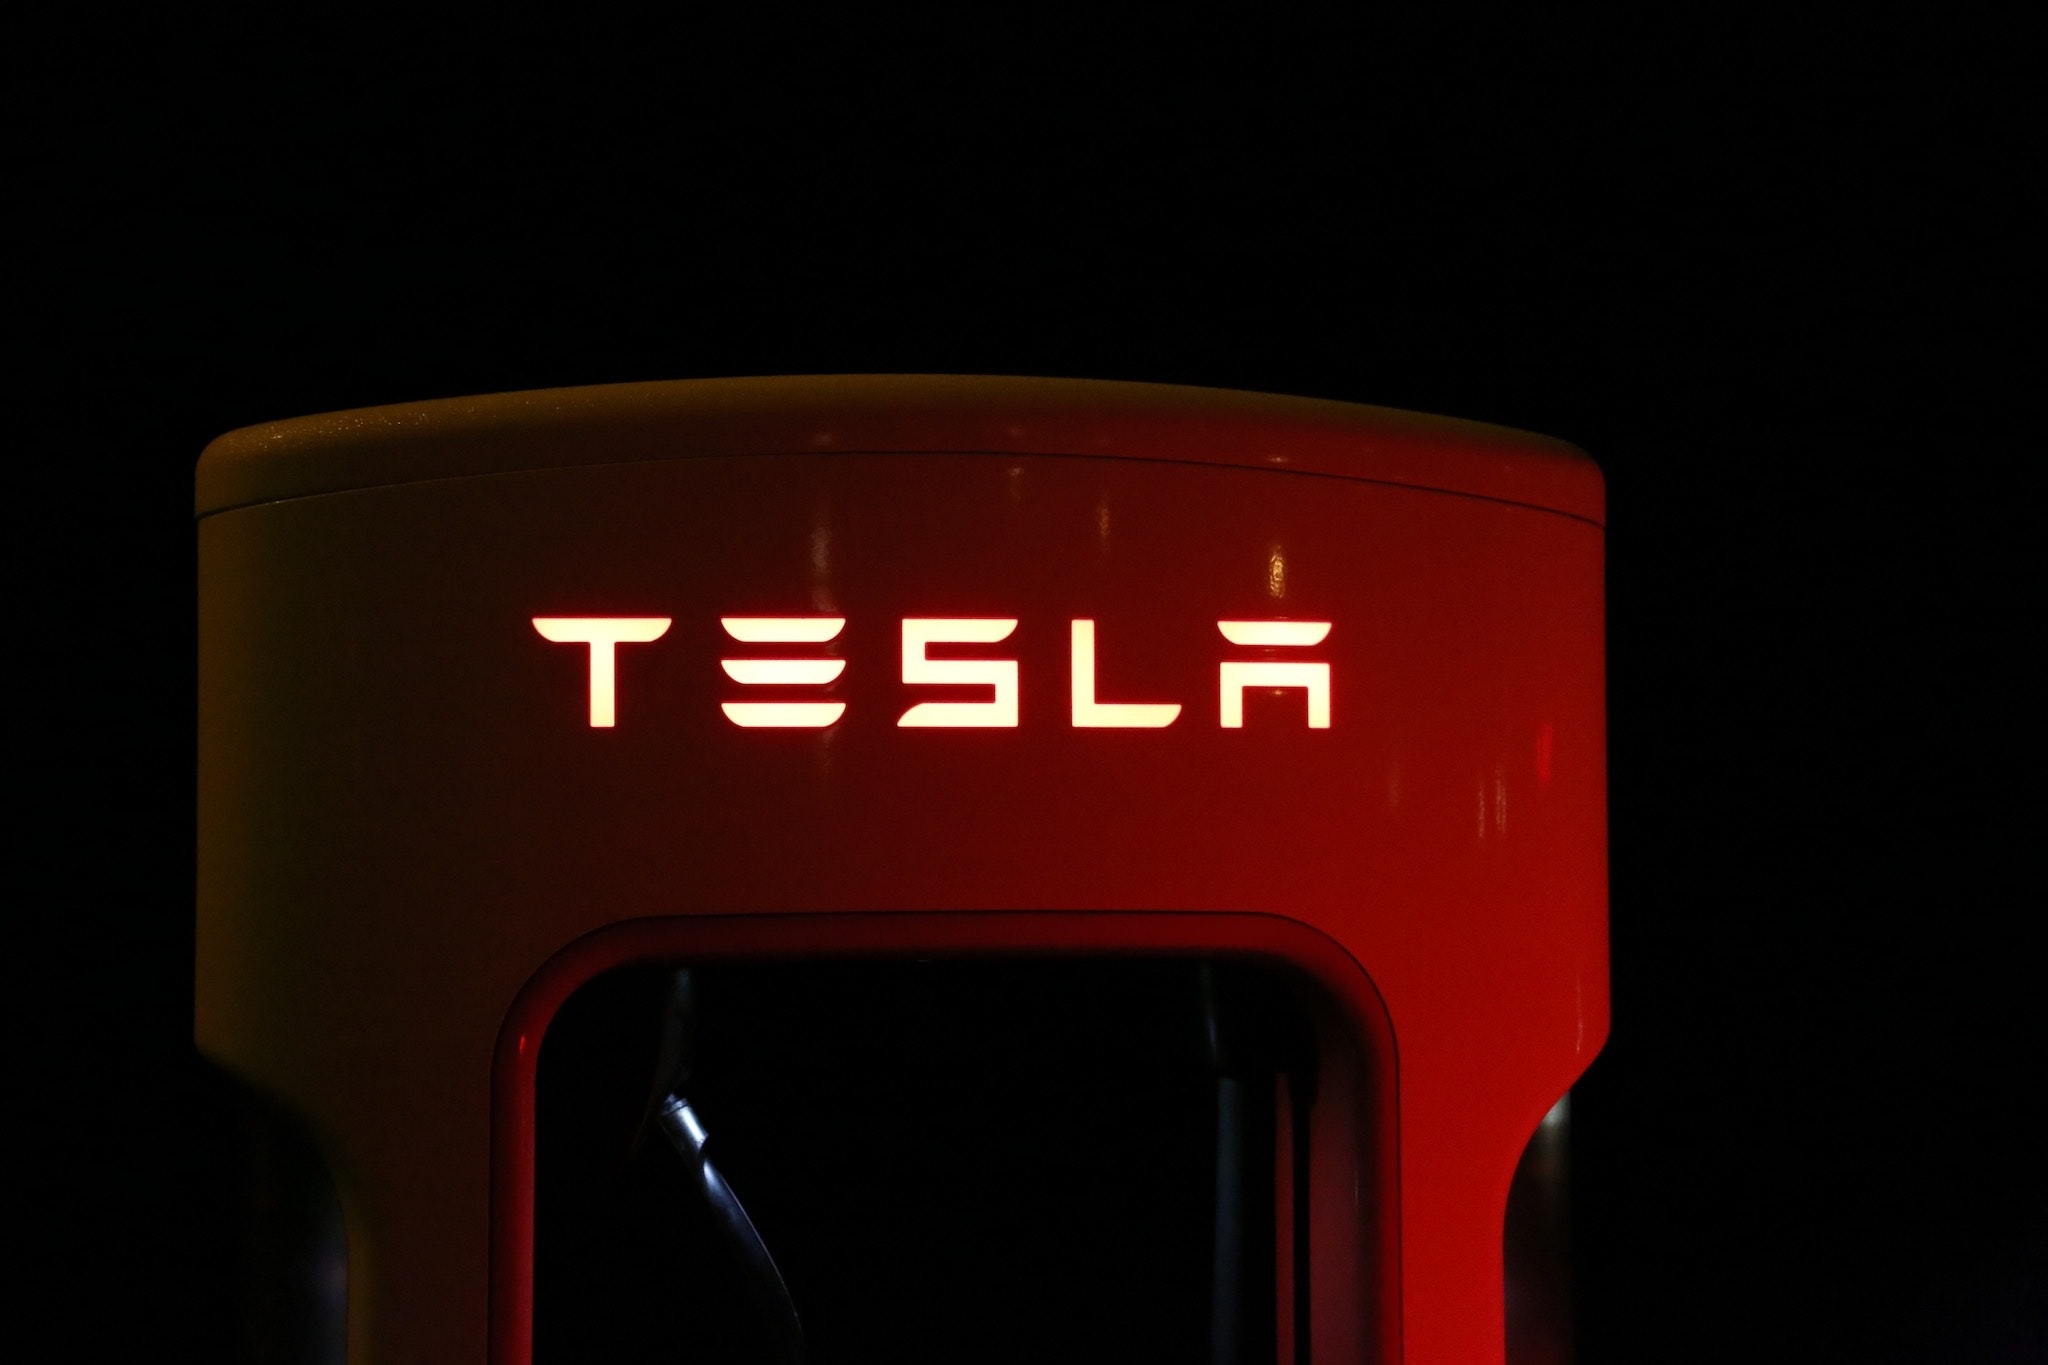 Tesla shares surged by about 7% on strong delivery and production numbers